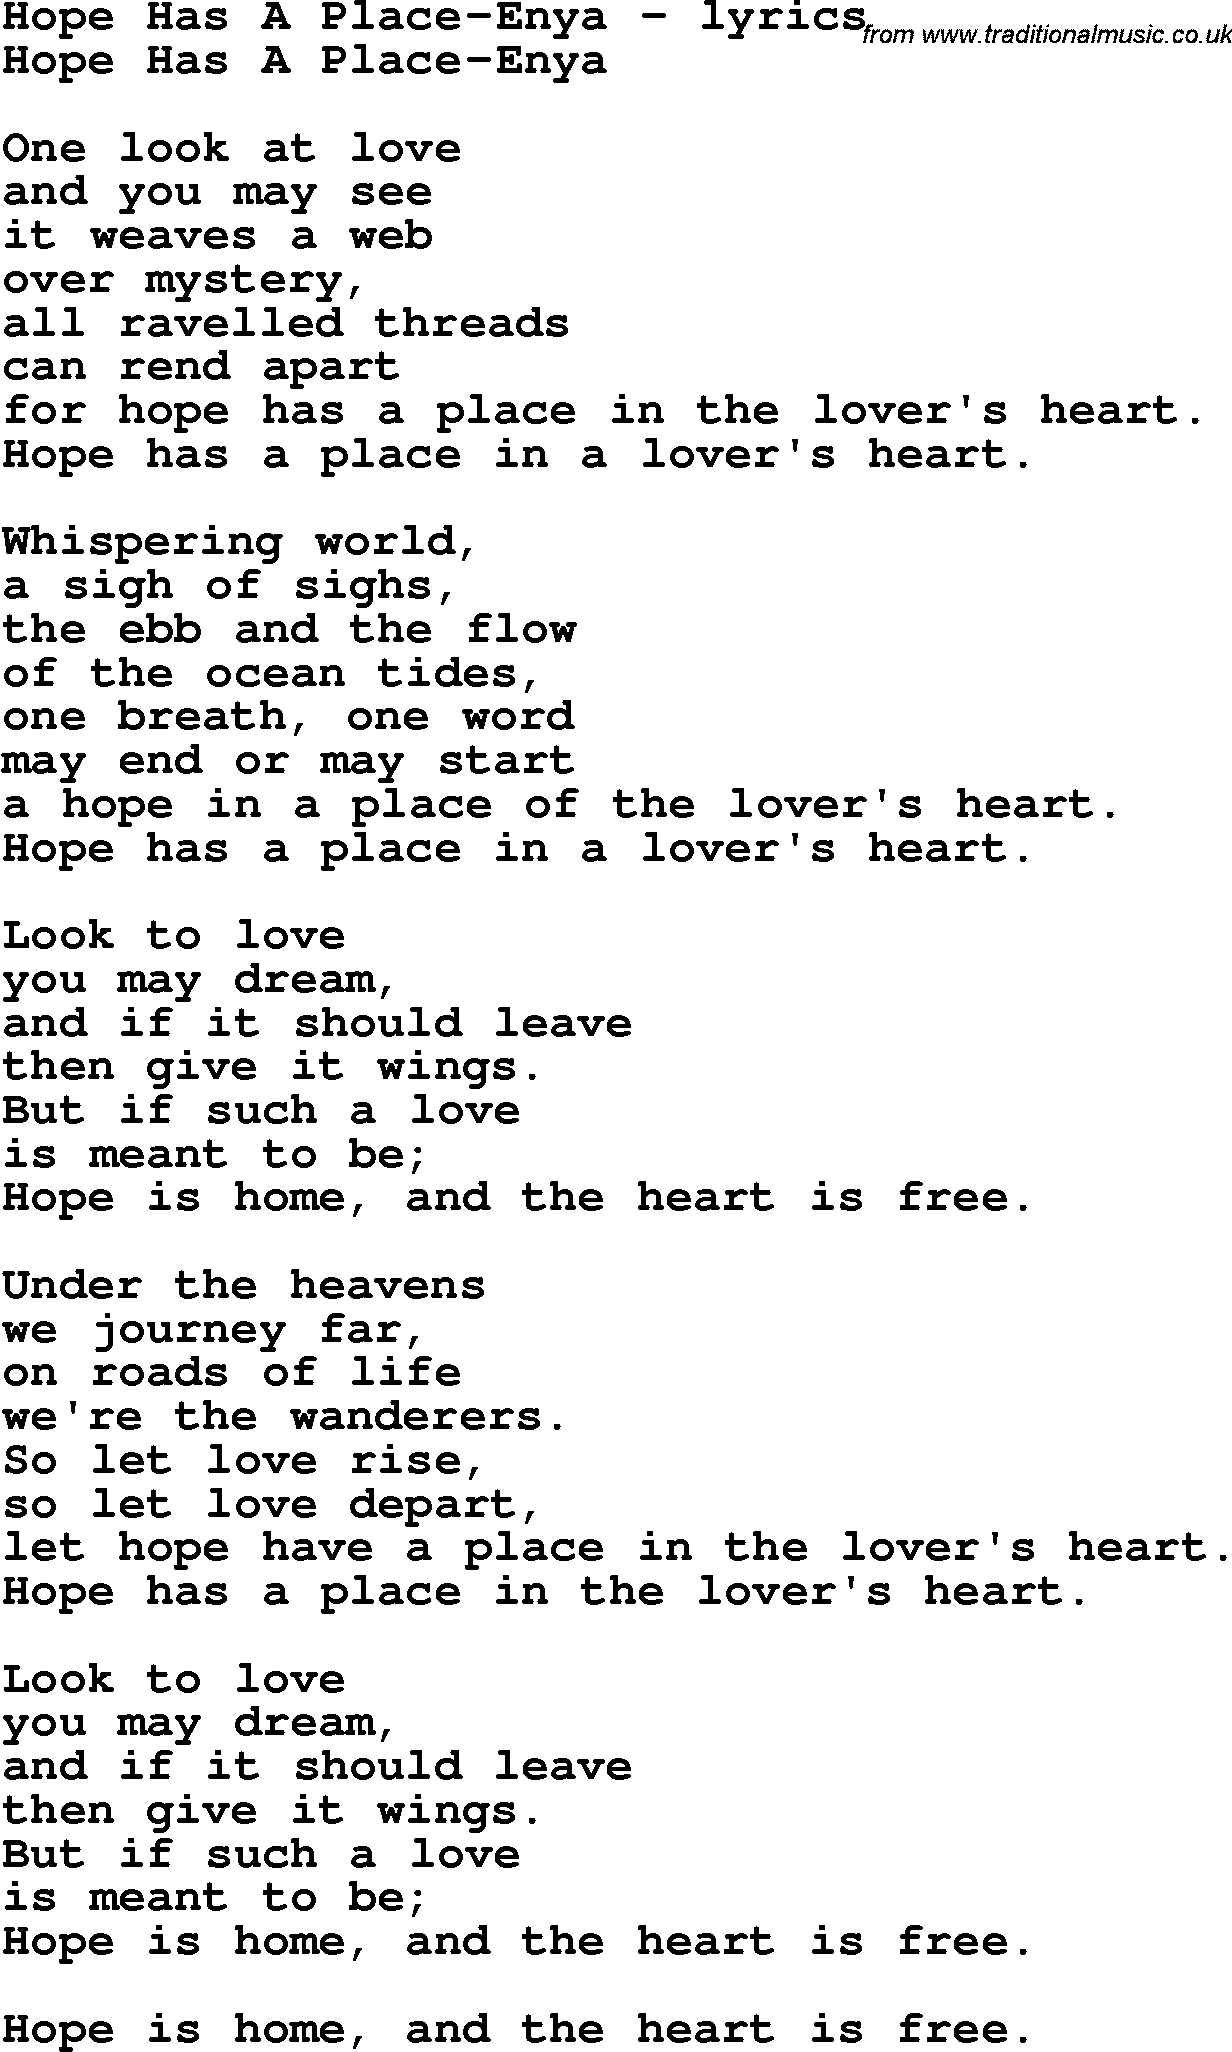 Love Song Lyrics for: Hope Has A Place-Enya